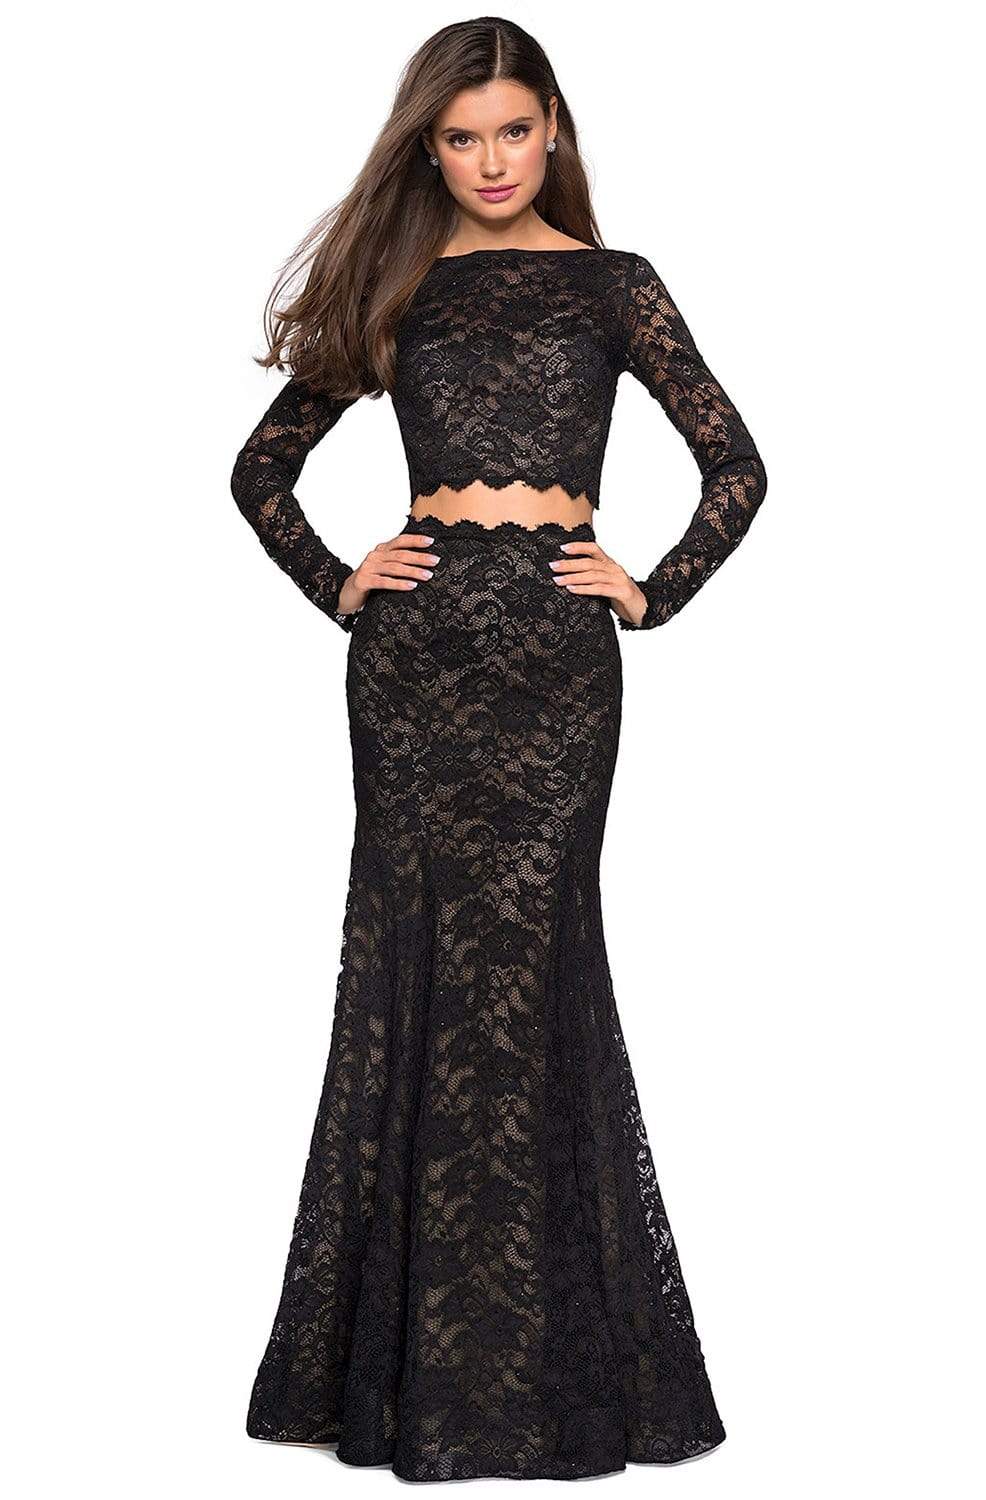 La Femme - 27601 Two-Piece Allover Lace Long Sleeve Evening Gown Evening Dresses 00 / Black